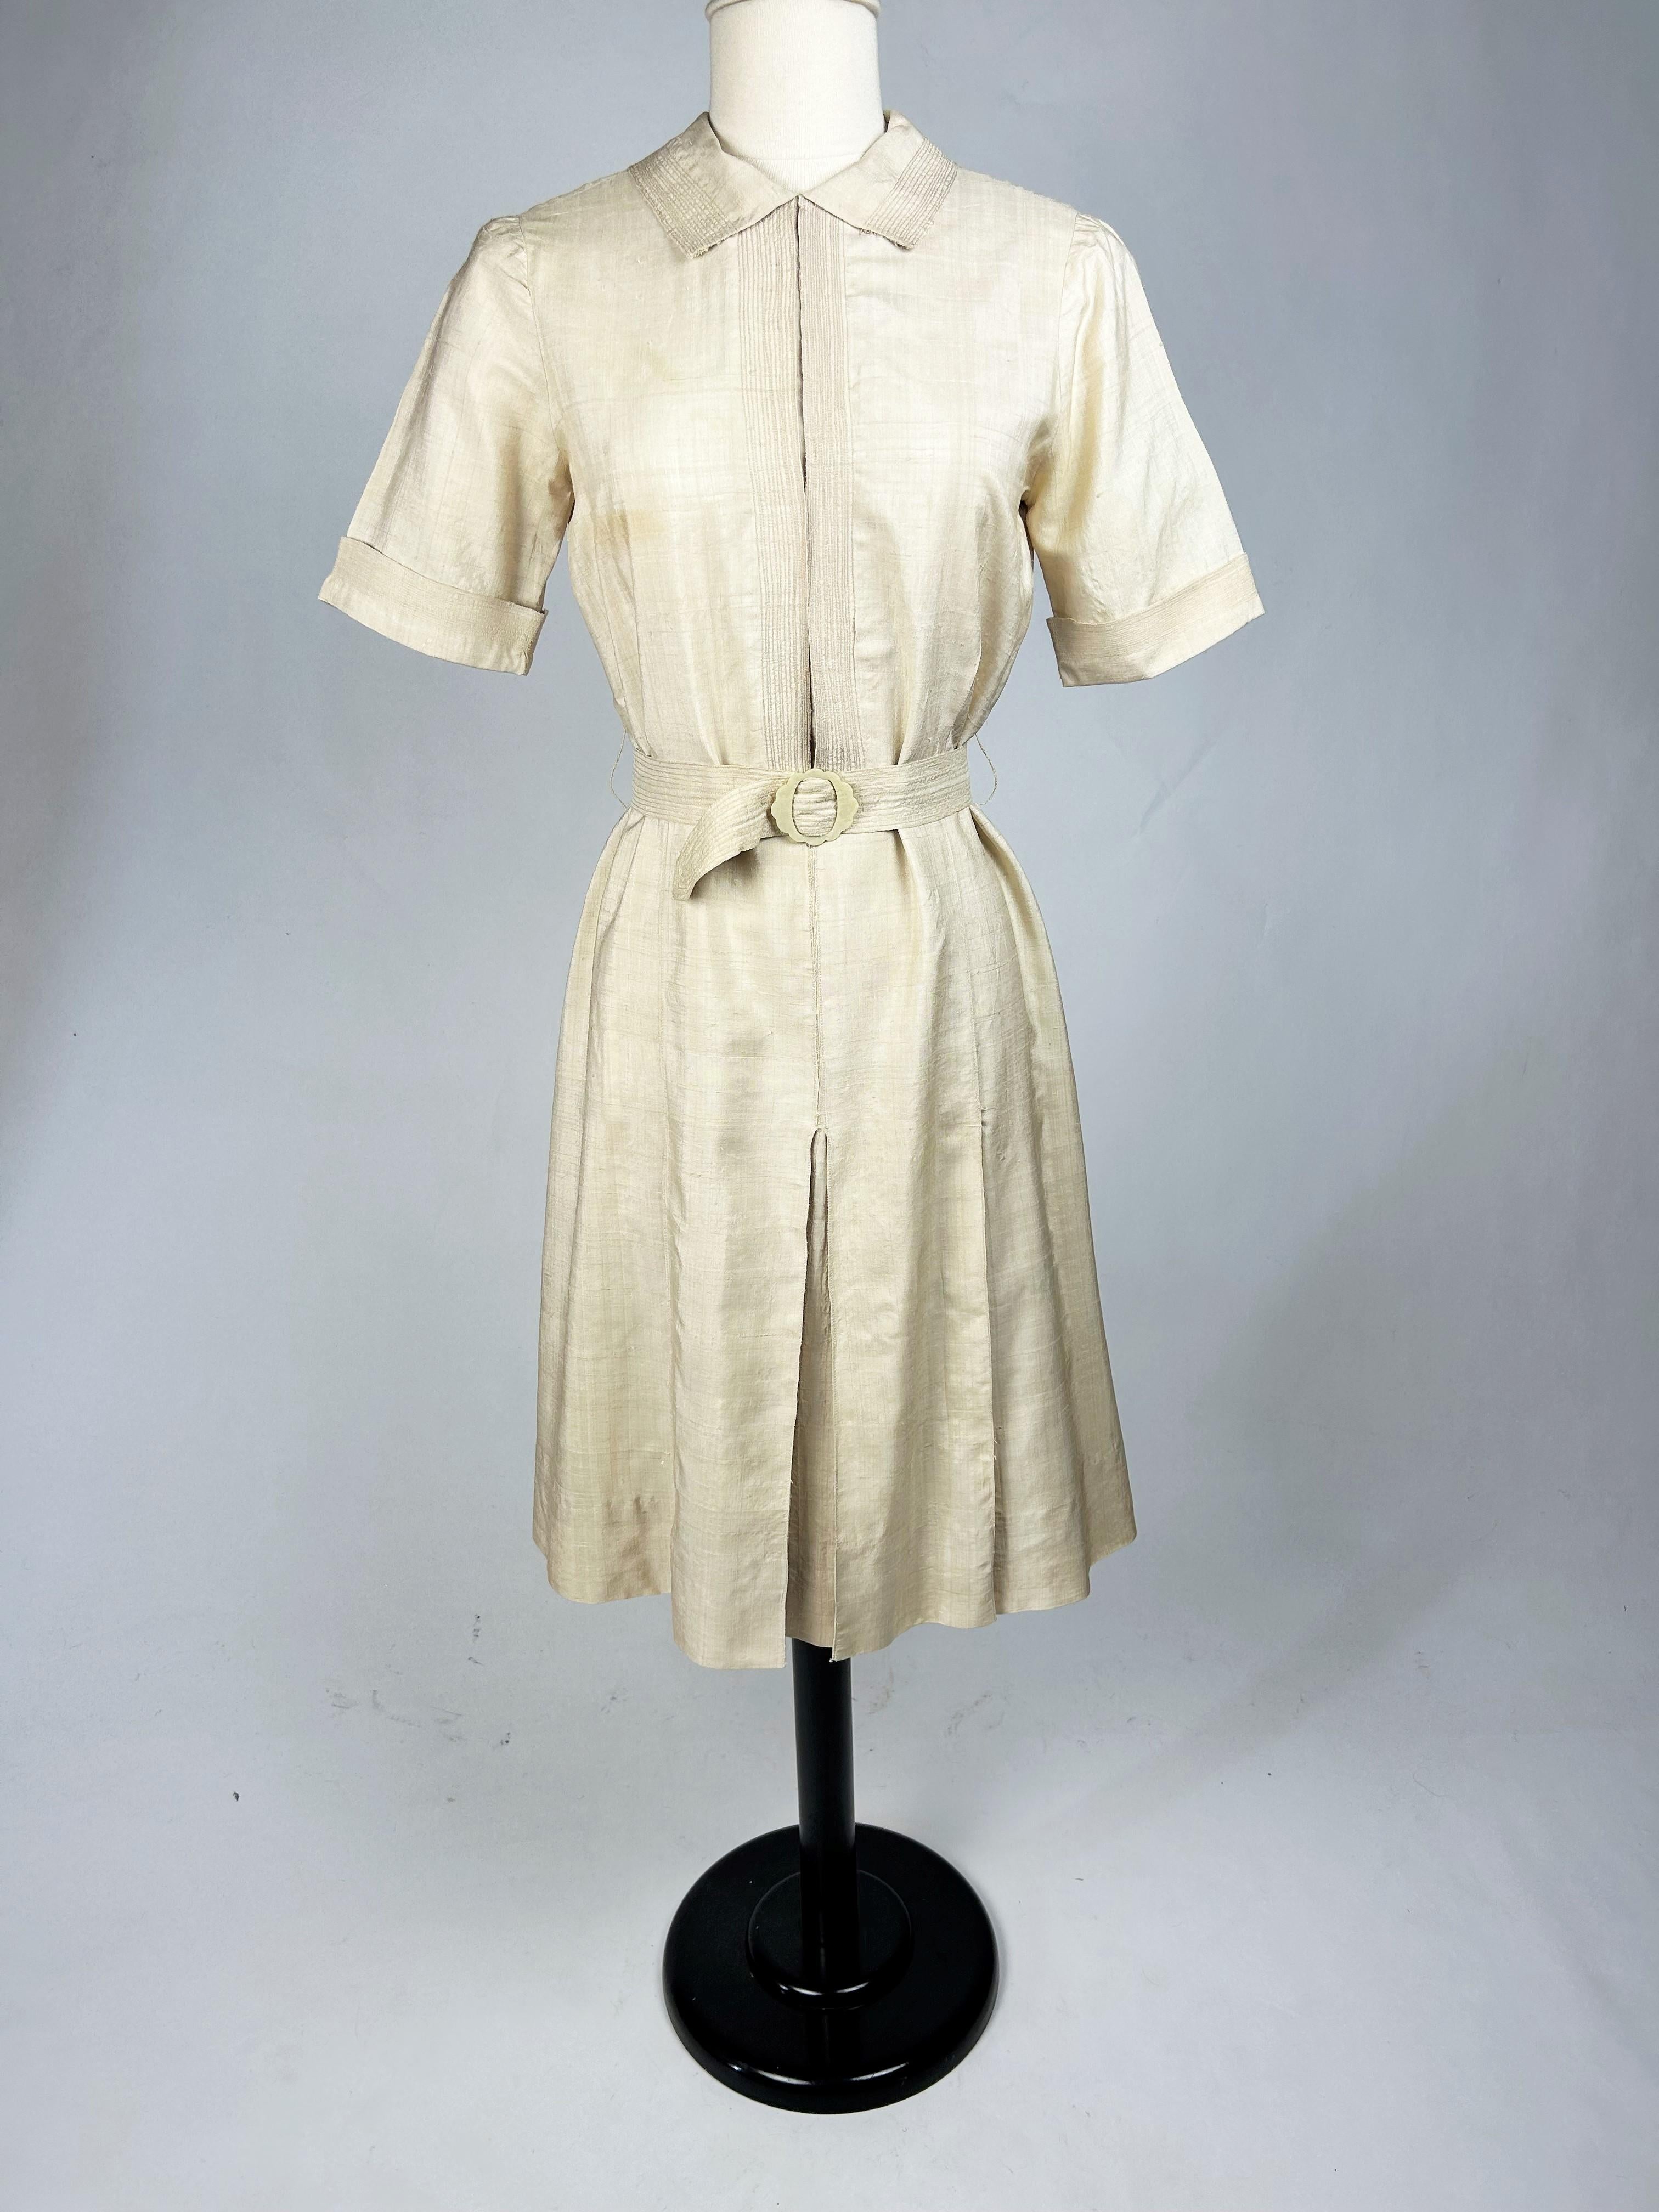 Circa 1930-1940

France

Elegant summer dress in unbleached raw silk from the 1930s-1940s, inspired by the sober, relaxed cuts of Mademoiselle Chanel. A straight dress with a small Claudine crew neck, short sleeves and a back zip. Interesting